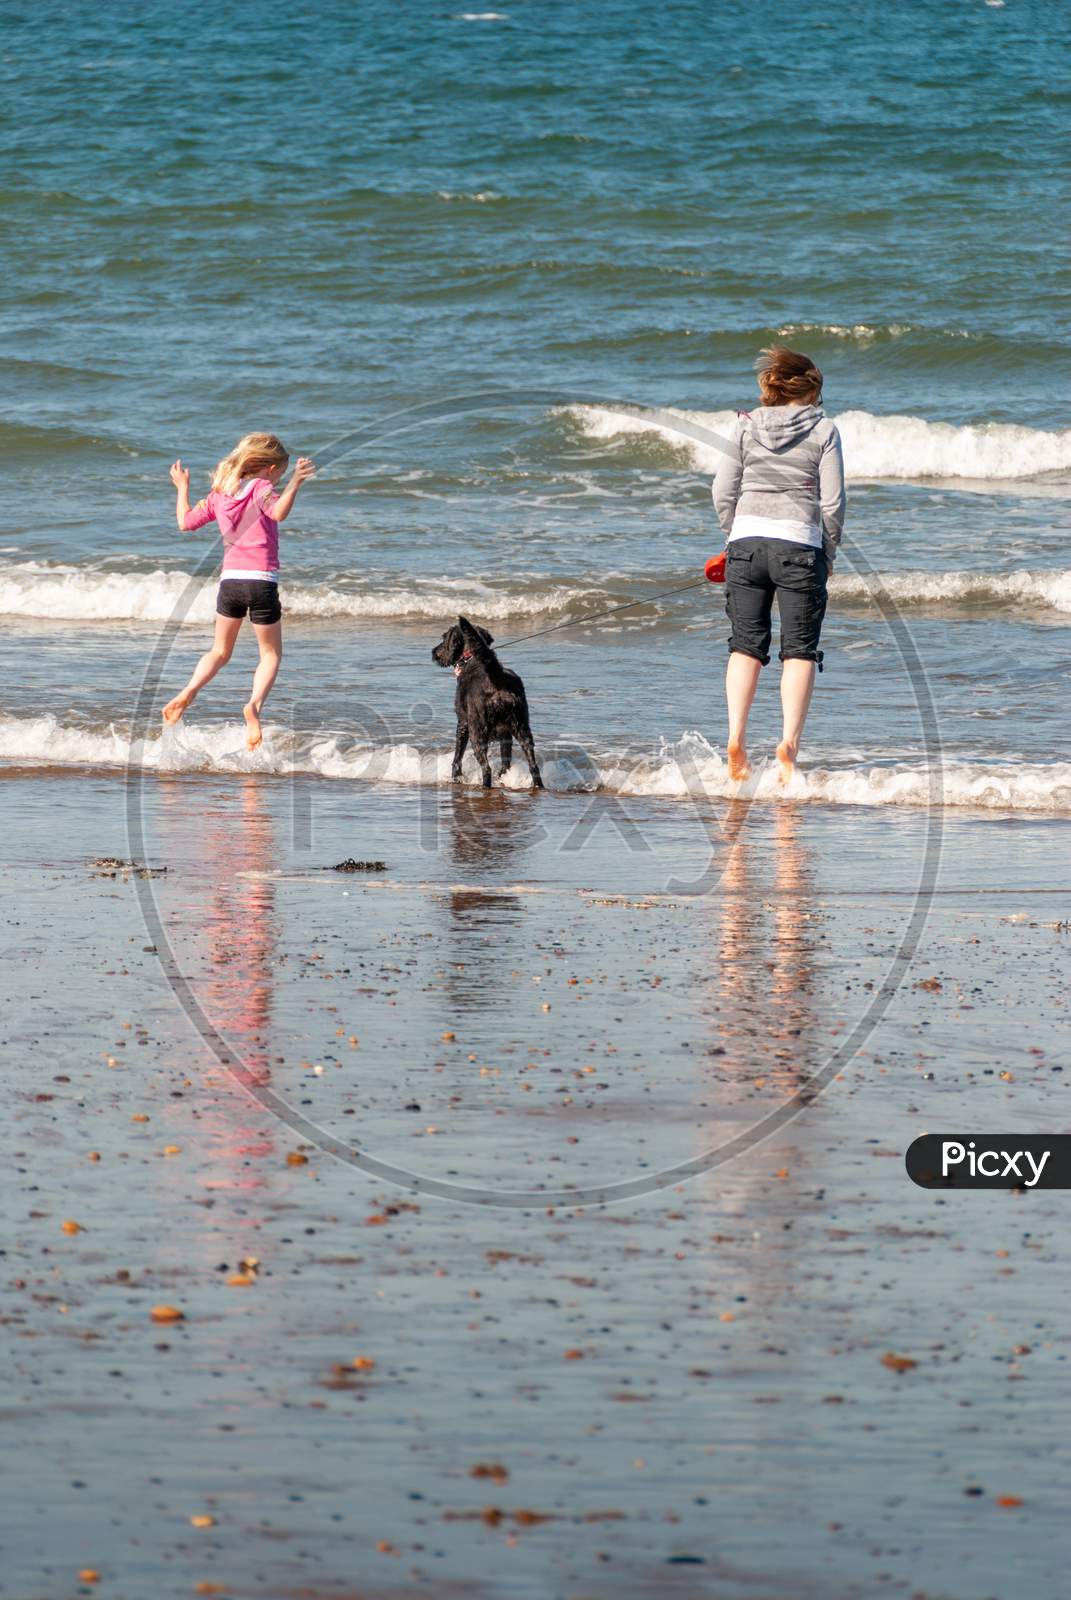 A Mother And Daughter With A Dog Jump Over The Breaking Waves On A Beach